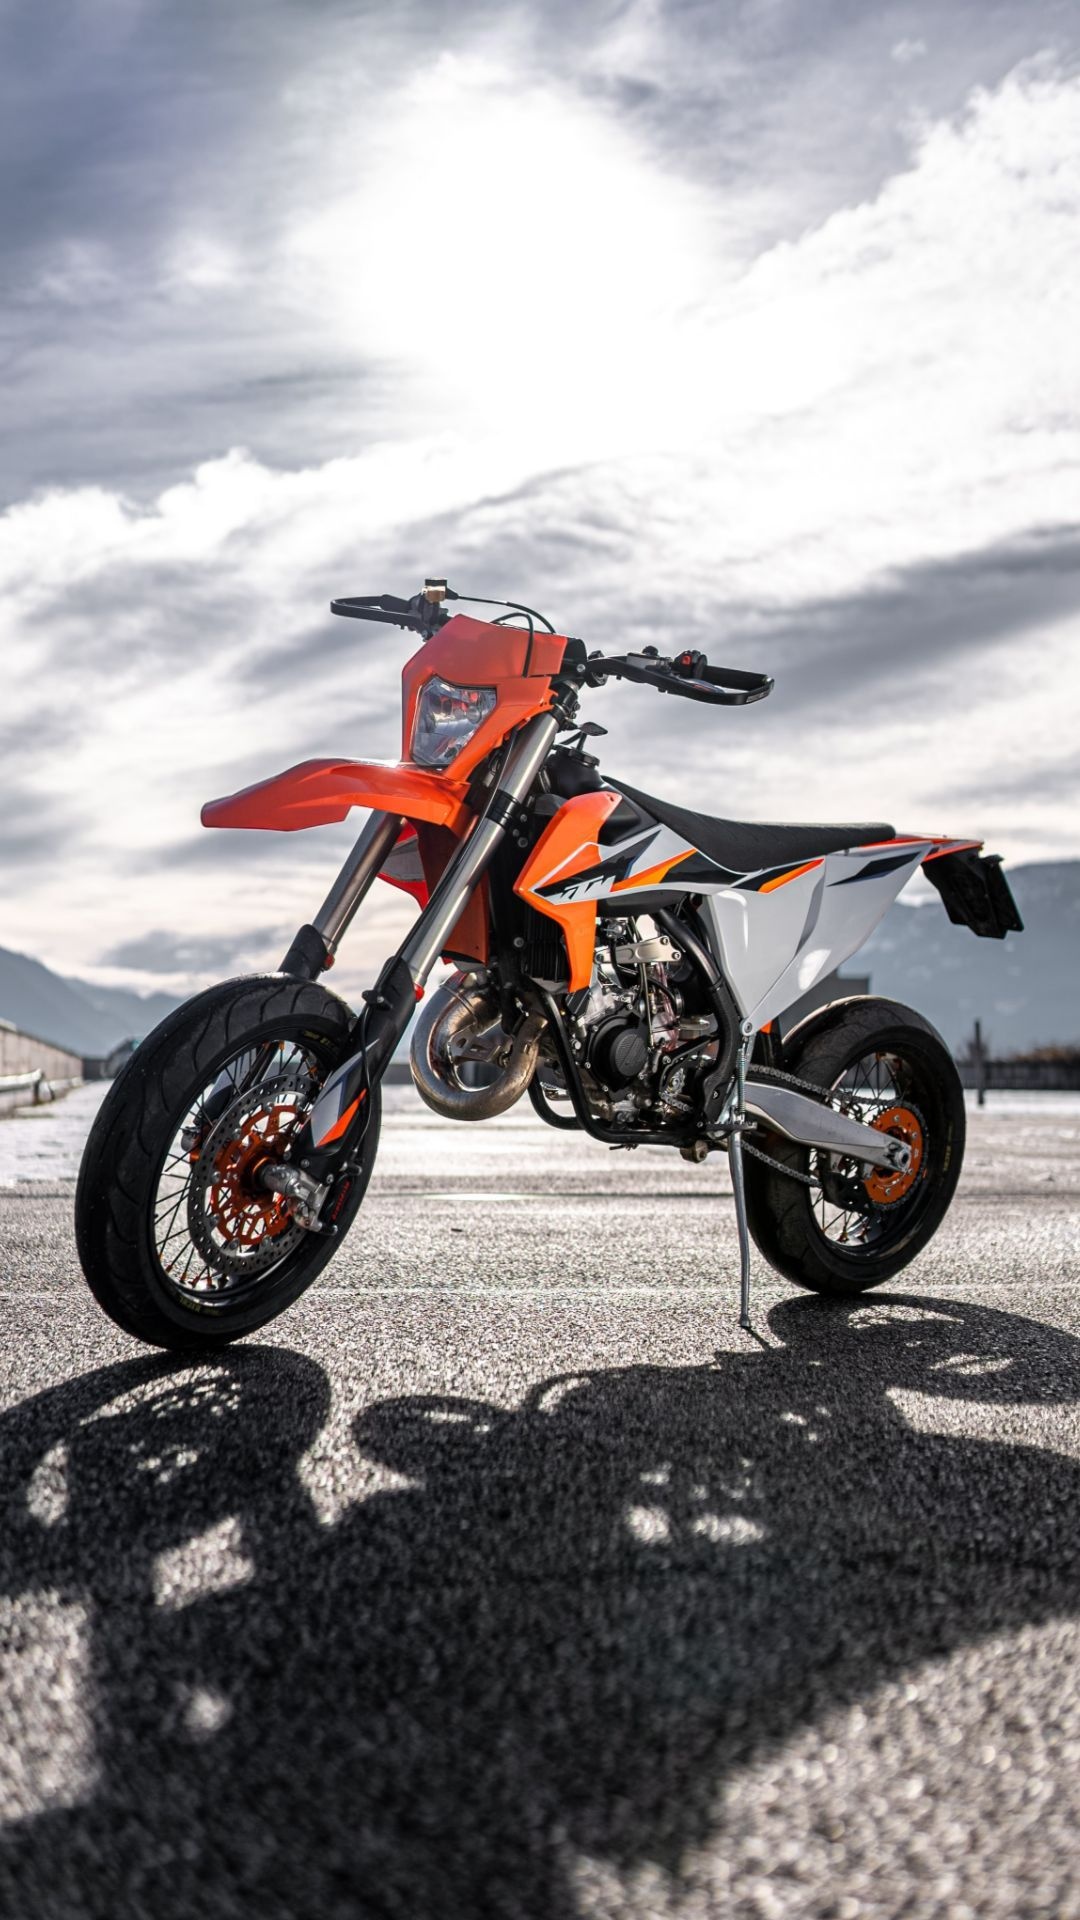 KTM supermoto, Stylish wallpapers, High-resolution images, Motorcycling, 1080x1920 Full HD Phone